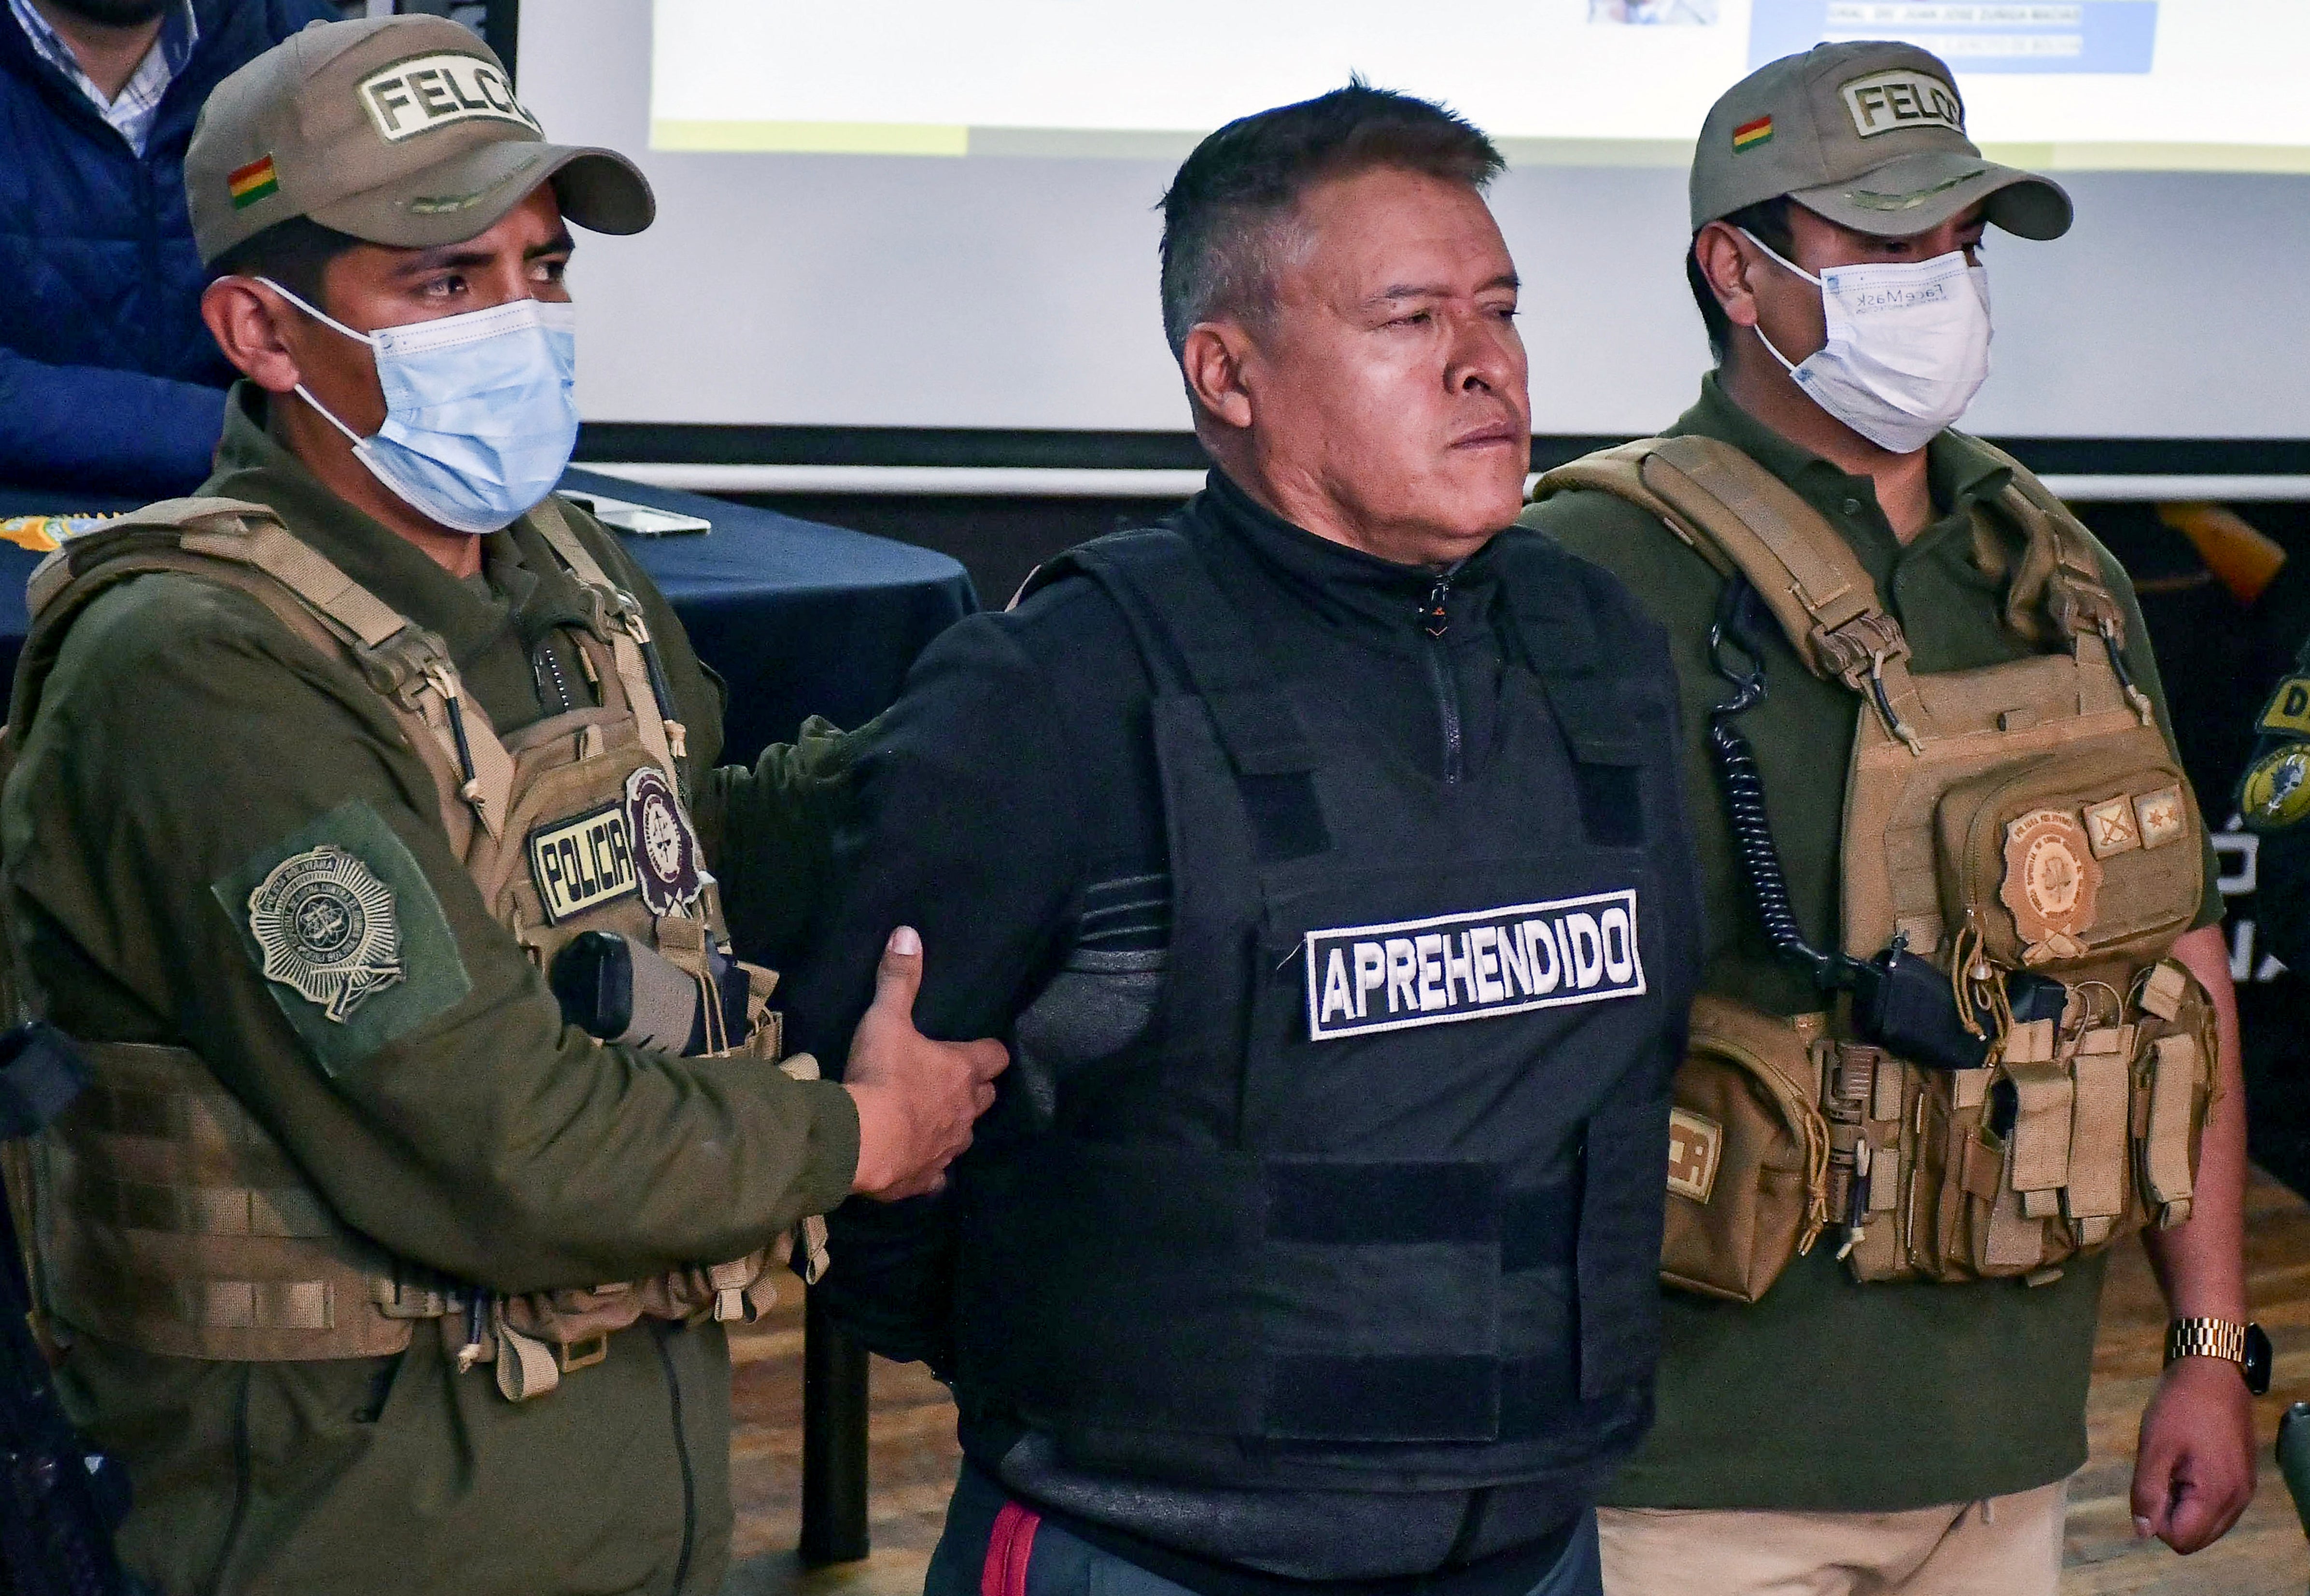 Bolivian army chief General Juan Jose Zuniga is arrested, accused of leading an attempted coup by the military